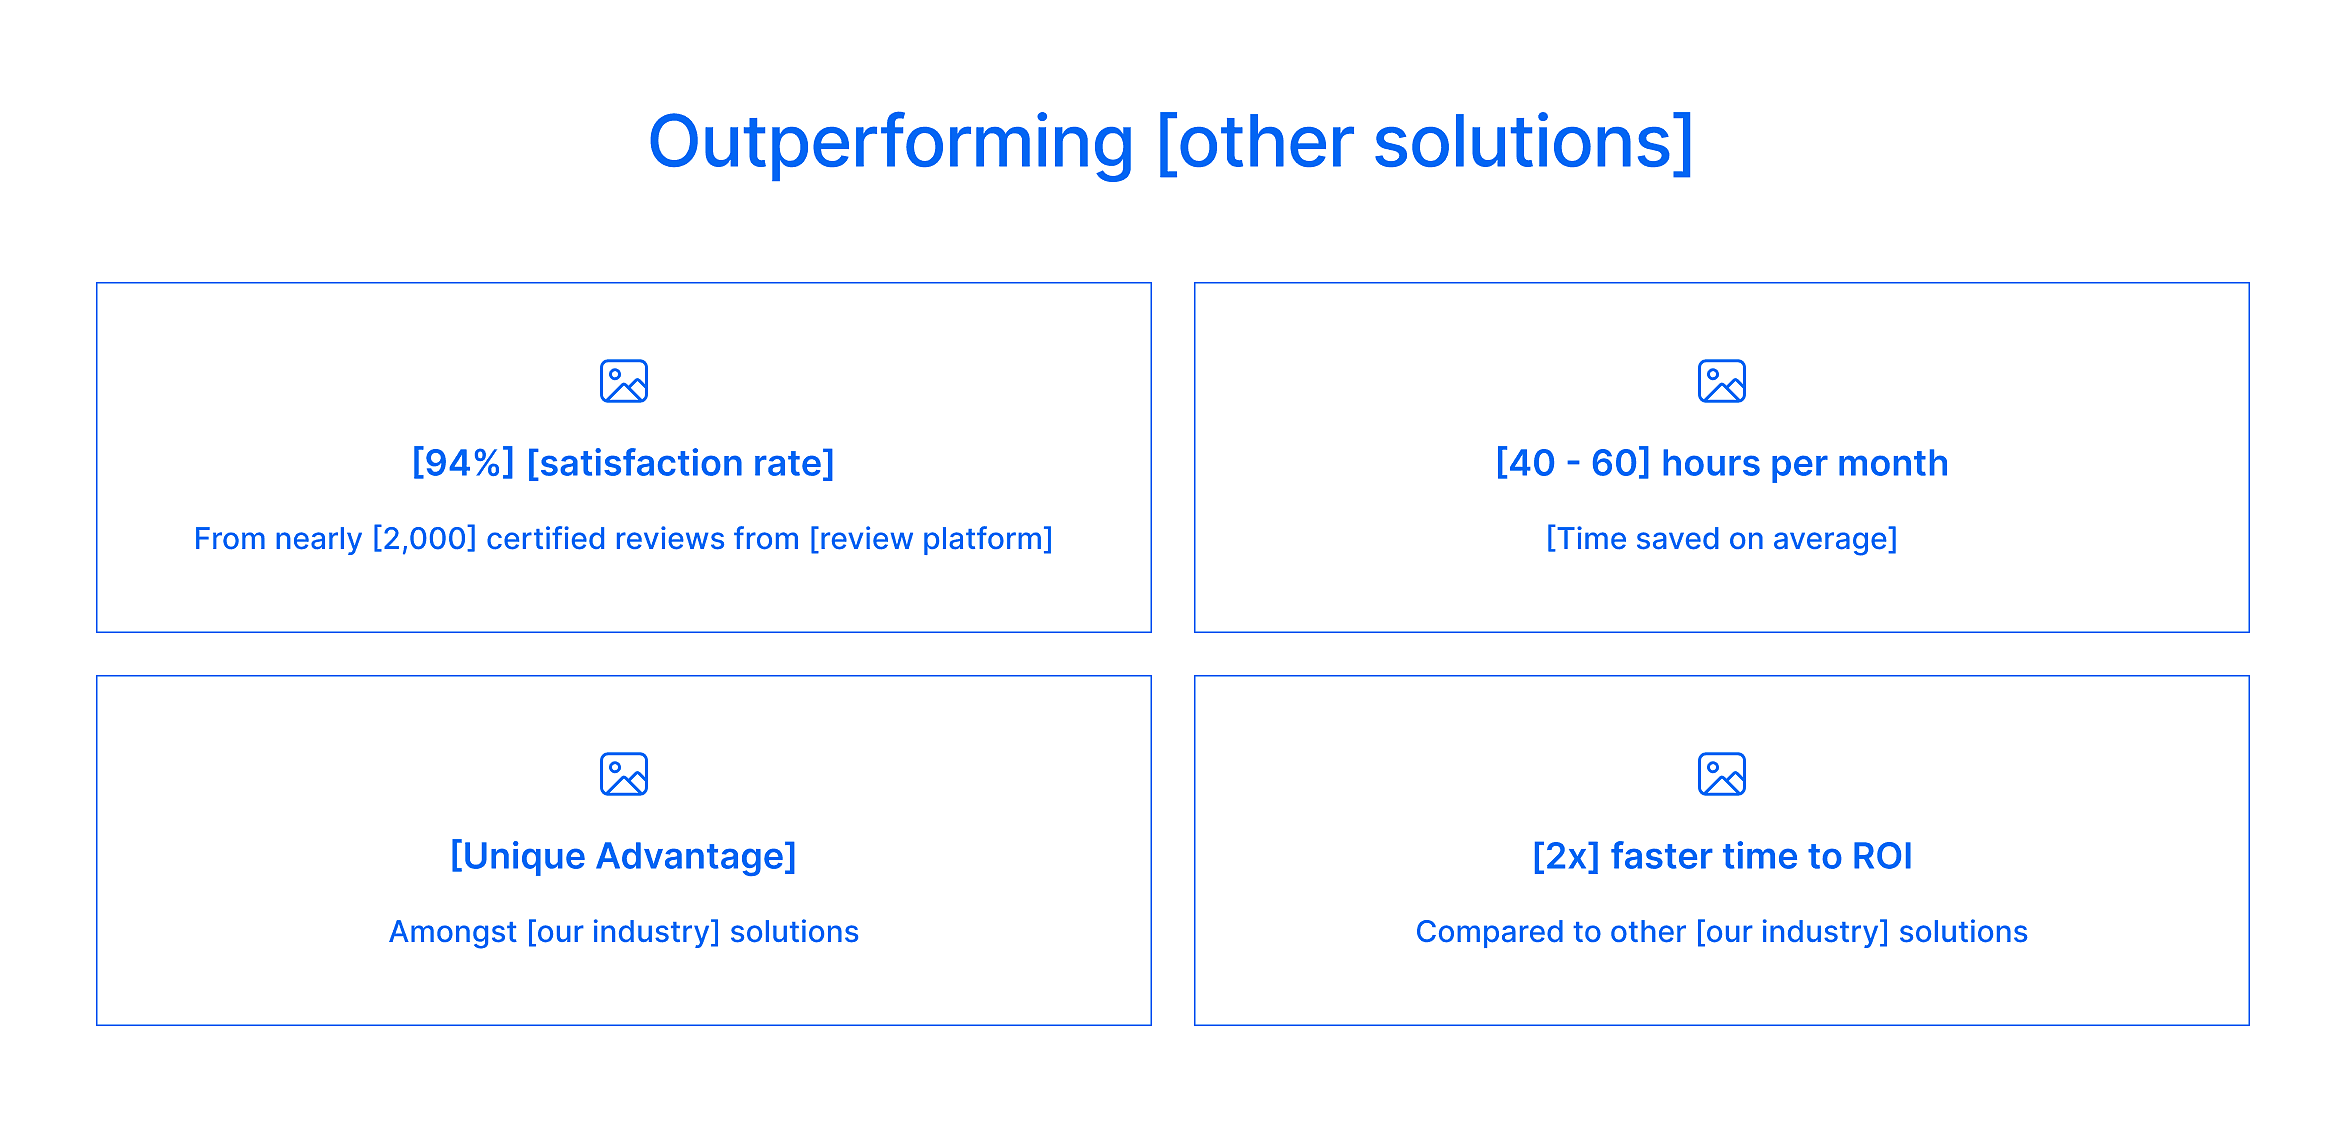 Blueprint of outperforming other solutions